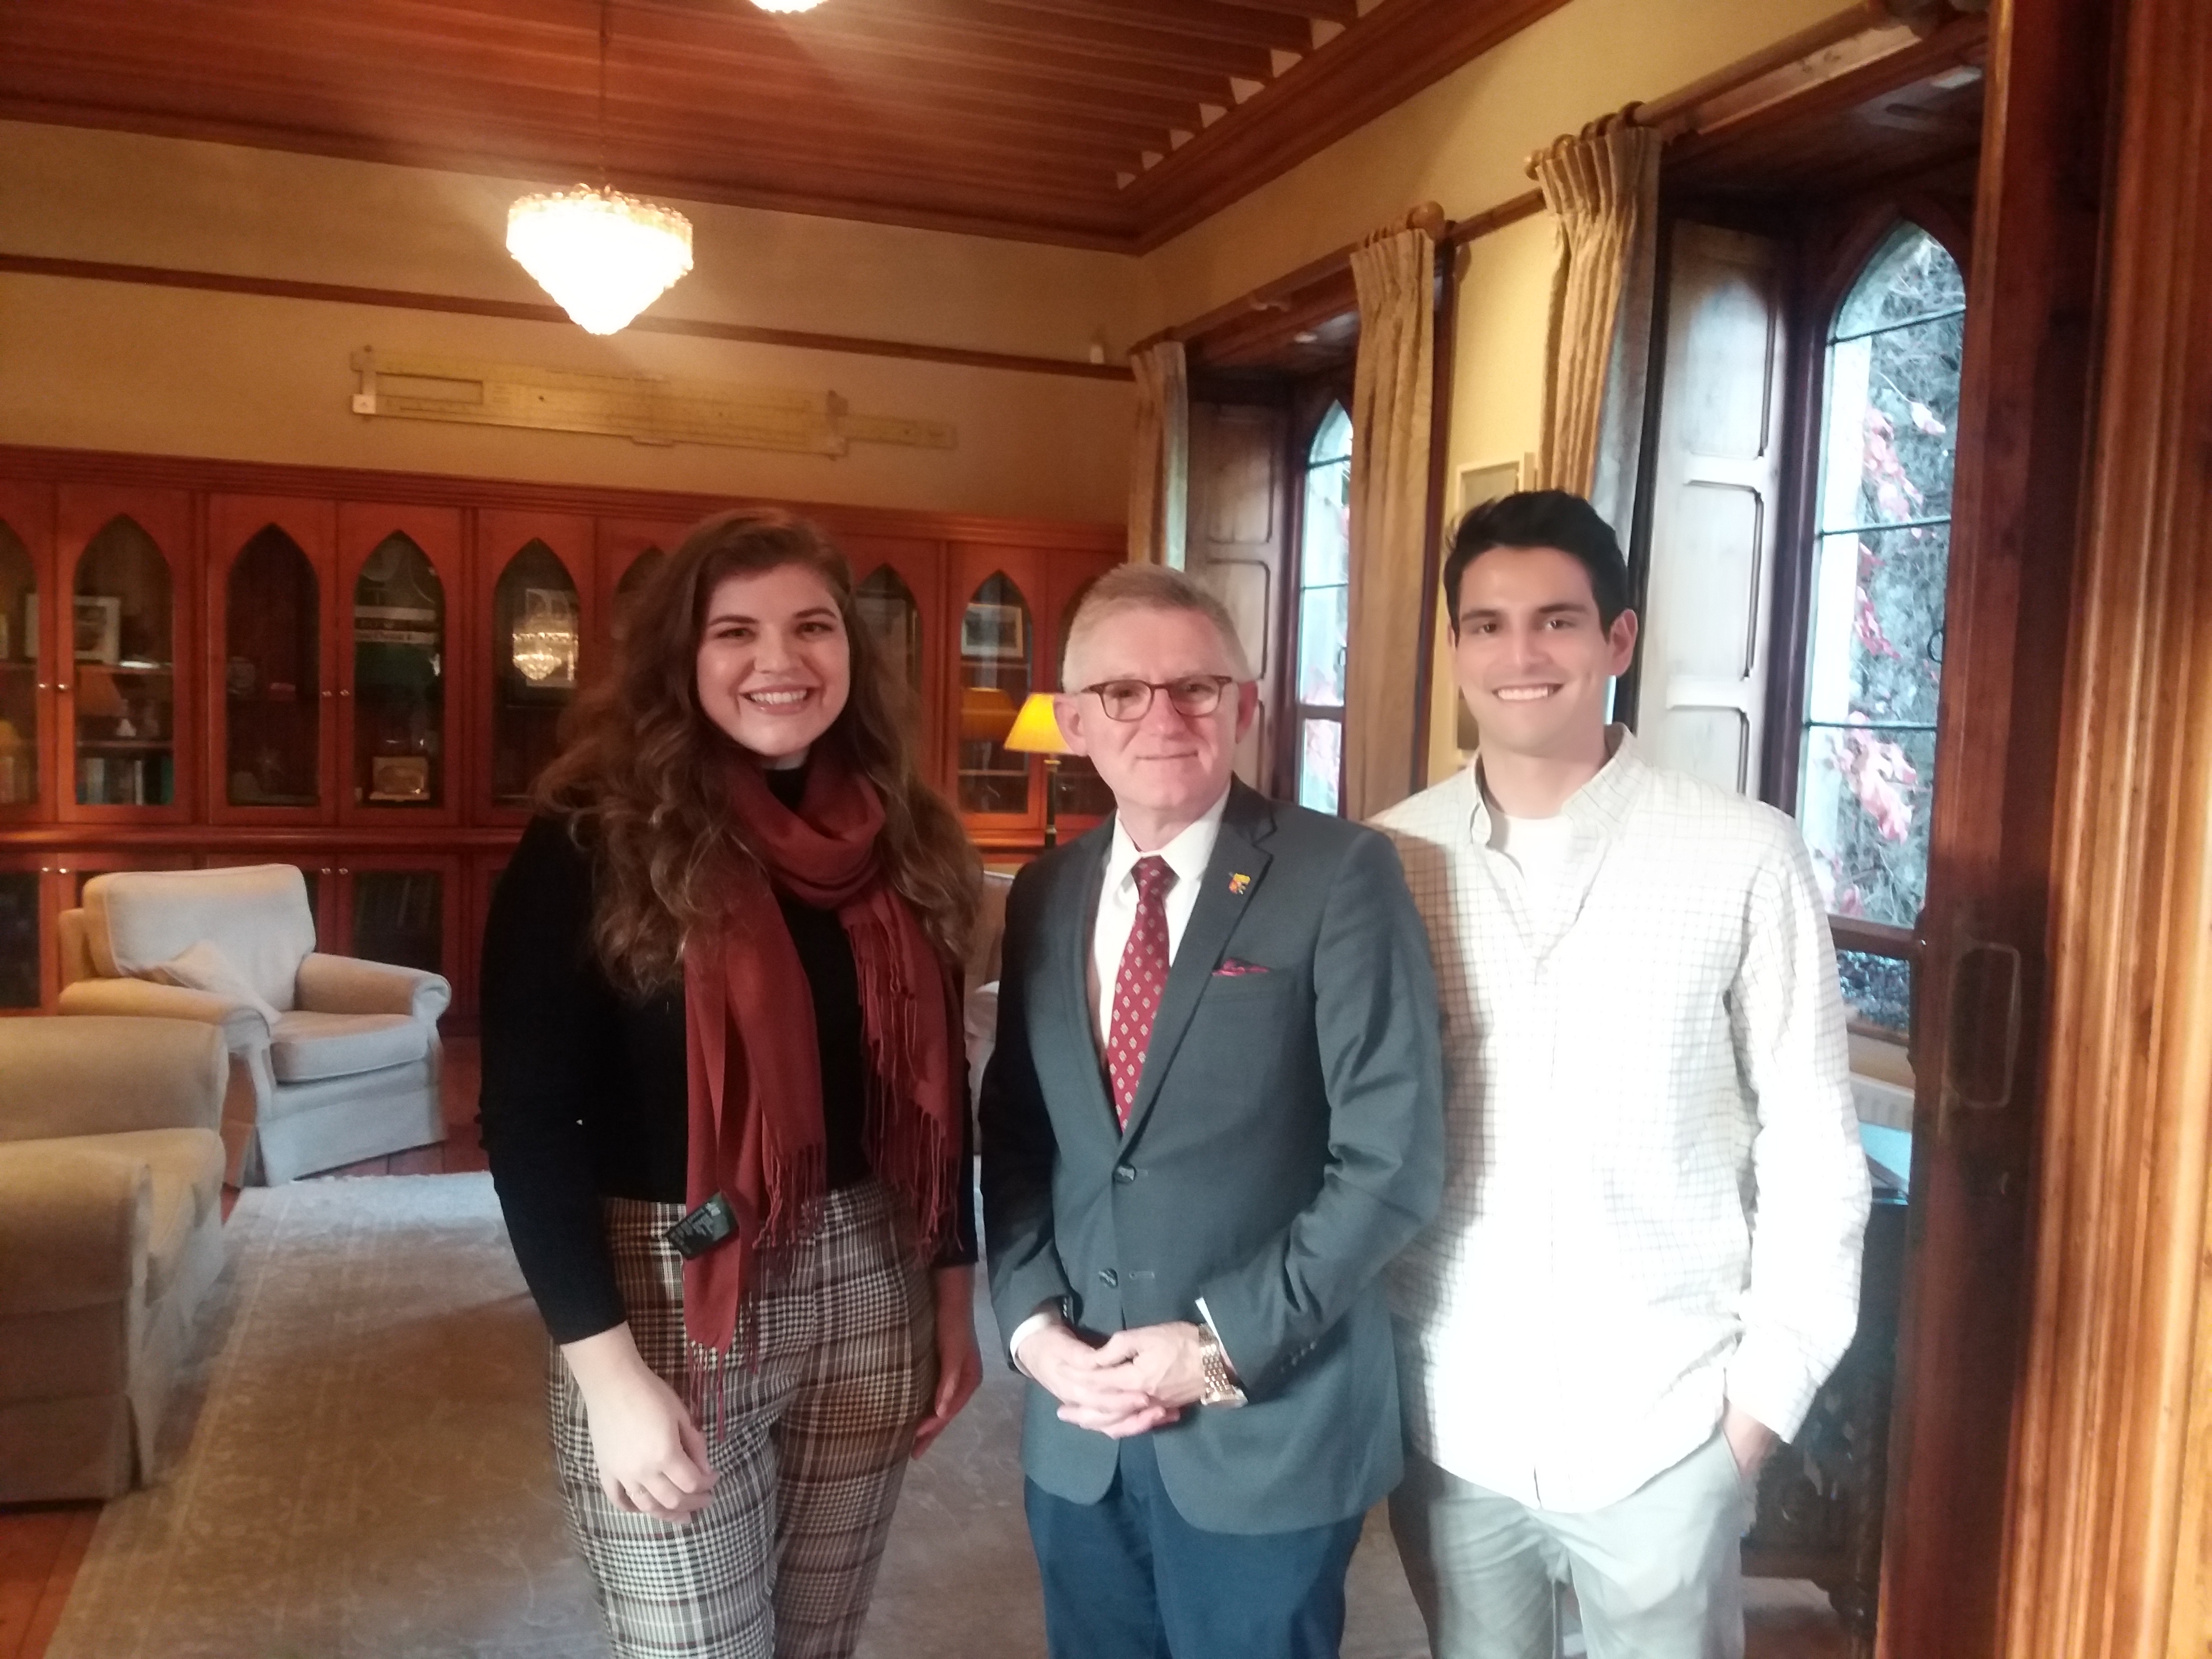 Mitchell and Choctaw Scholars meet with Professor O'Shea